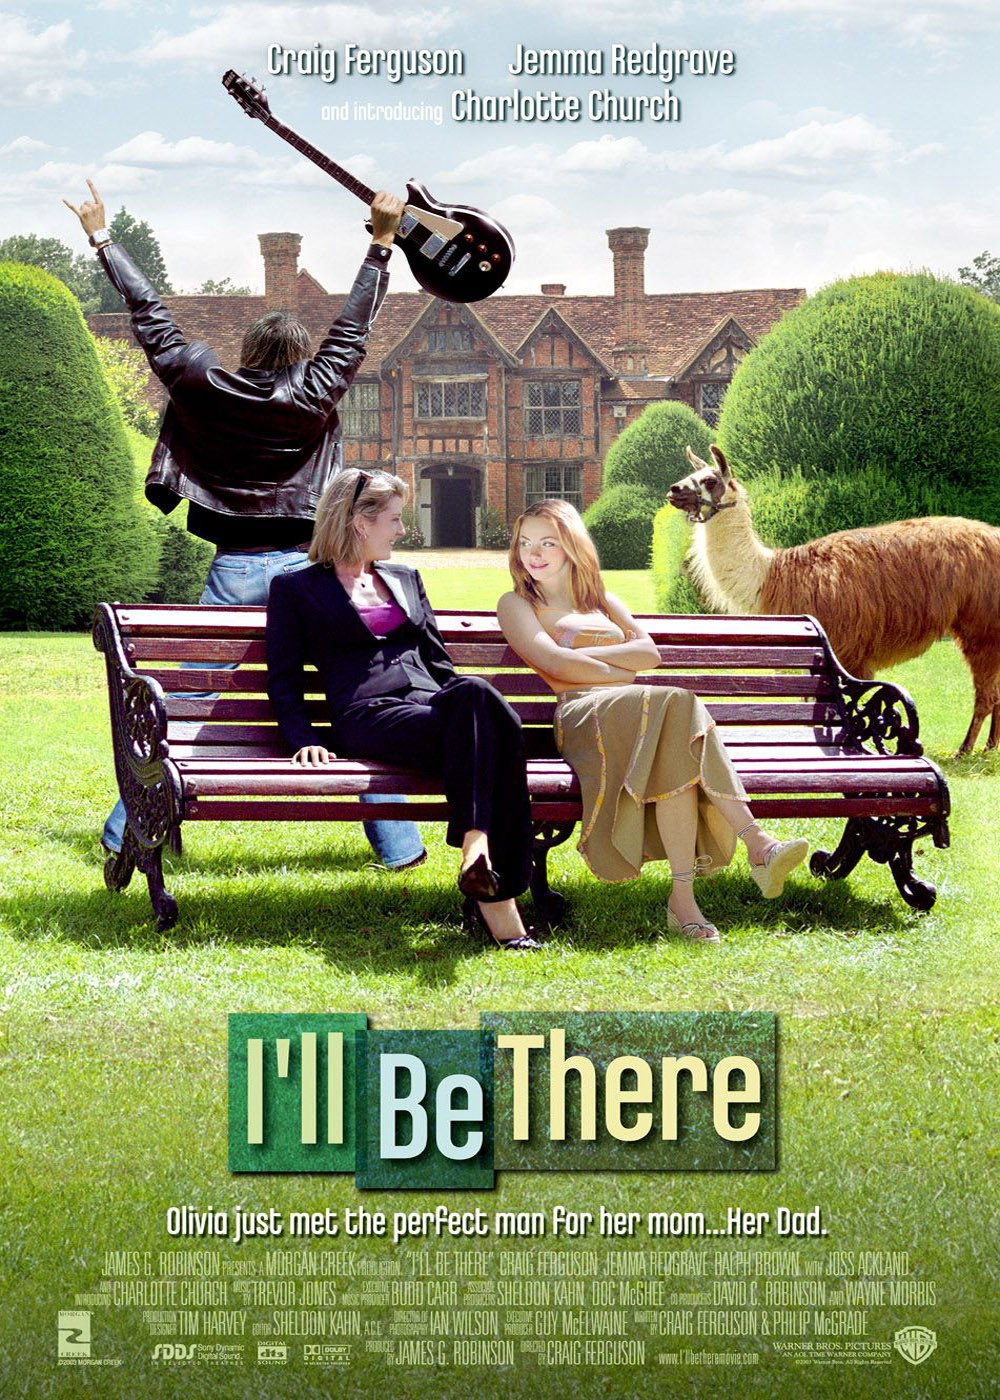 Poster for the movie "I'll Be There"